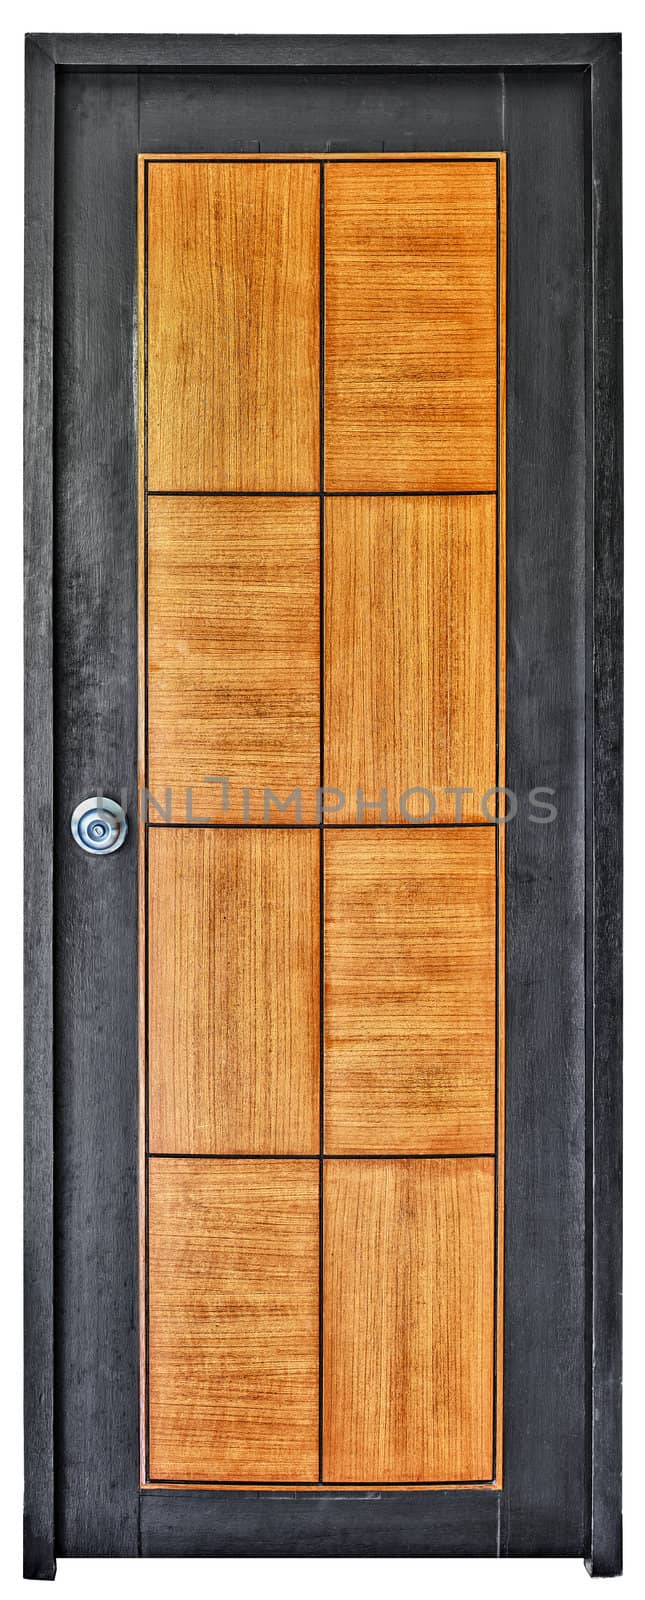 The modern wooden door isolated on white background